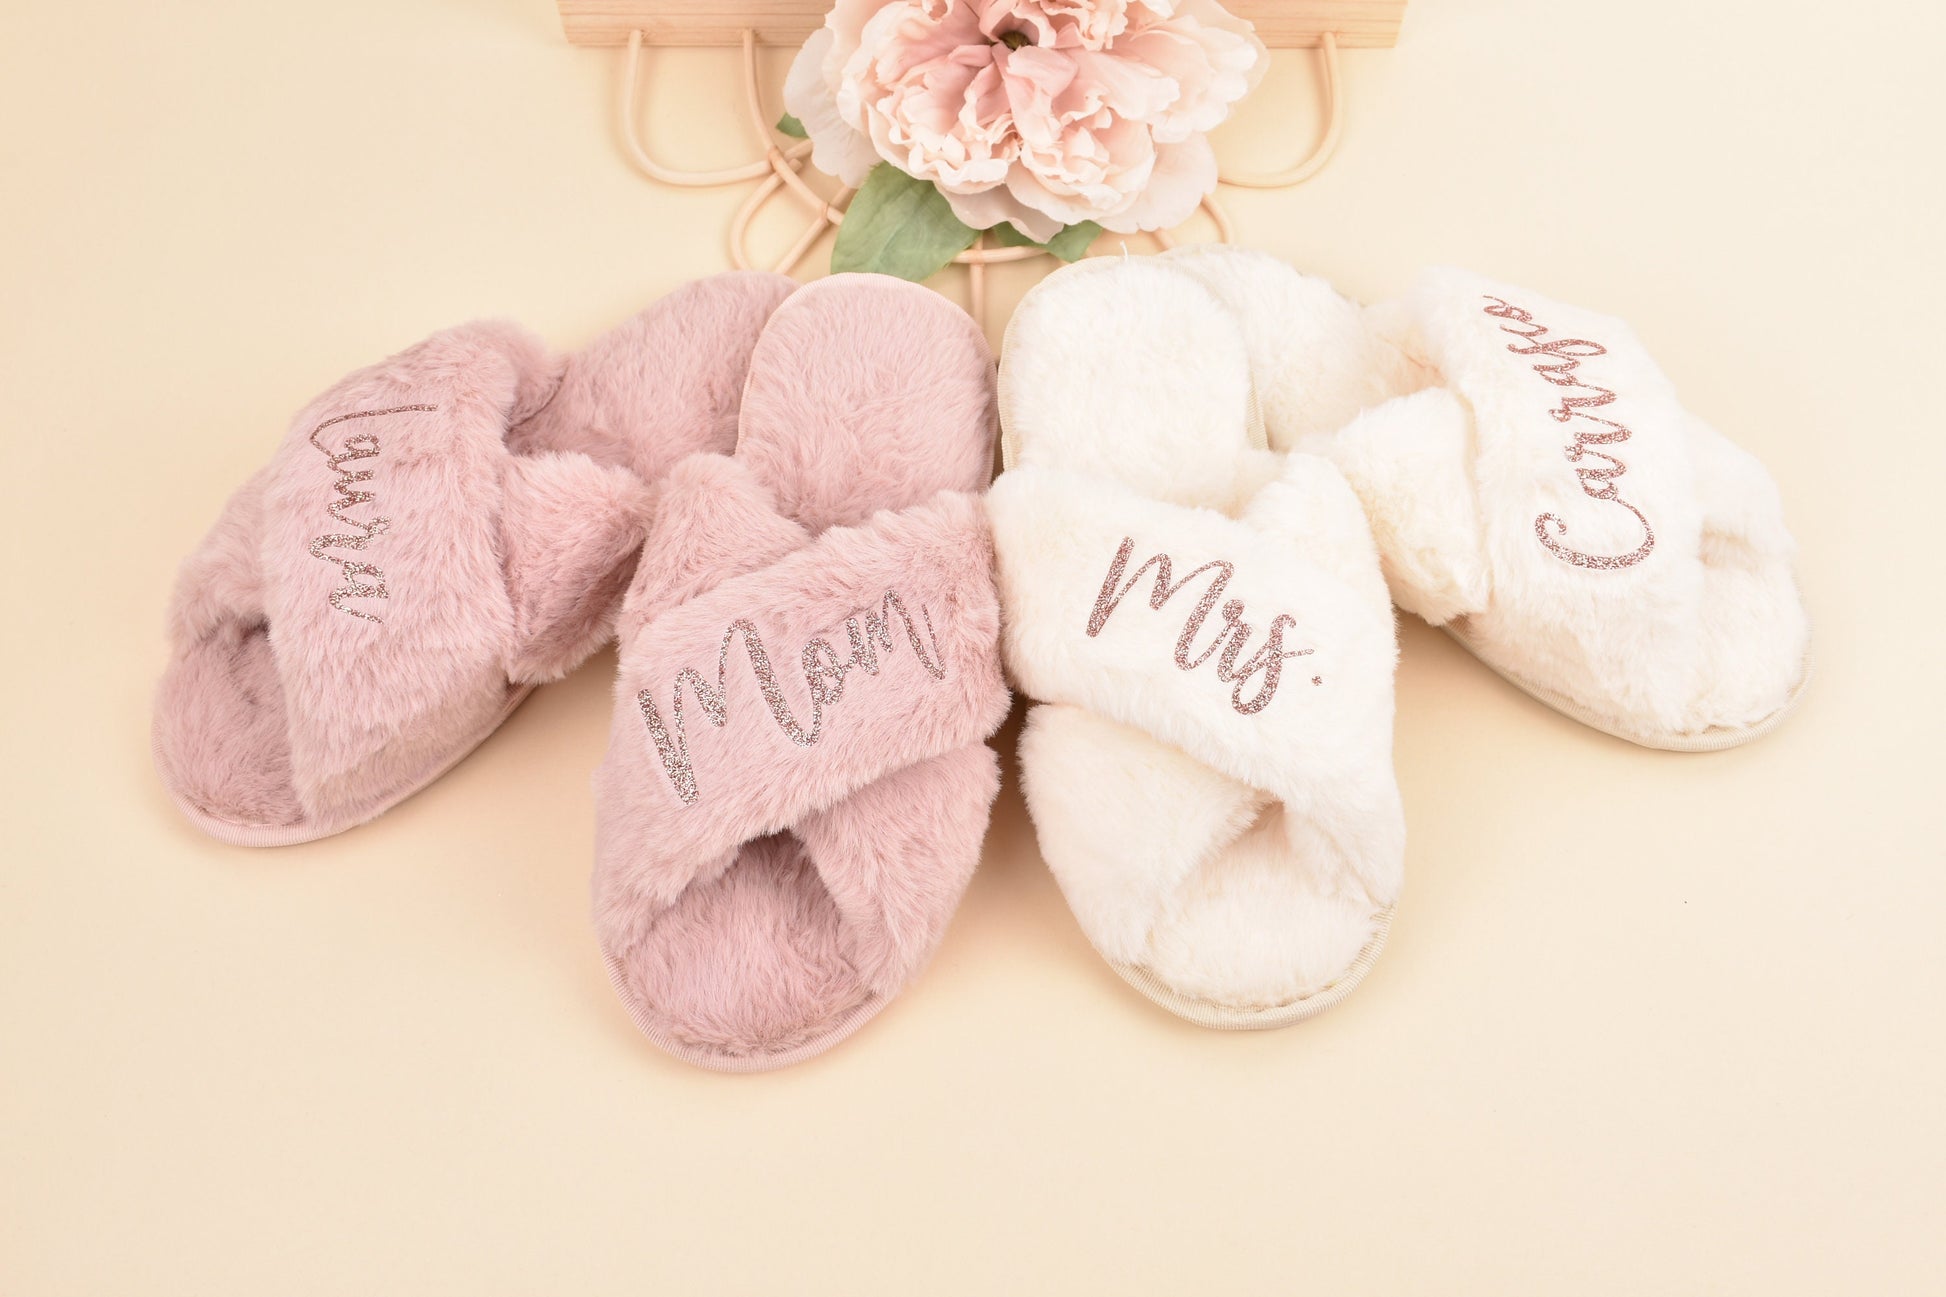 Bachelorette Party Fluffy Bride Bridesmaid Slippers Personalized Gifts Wedding Gifts Bridesmaid Gifts Bridal Shower Bachelorette Party Bride